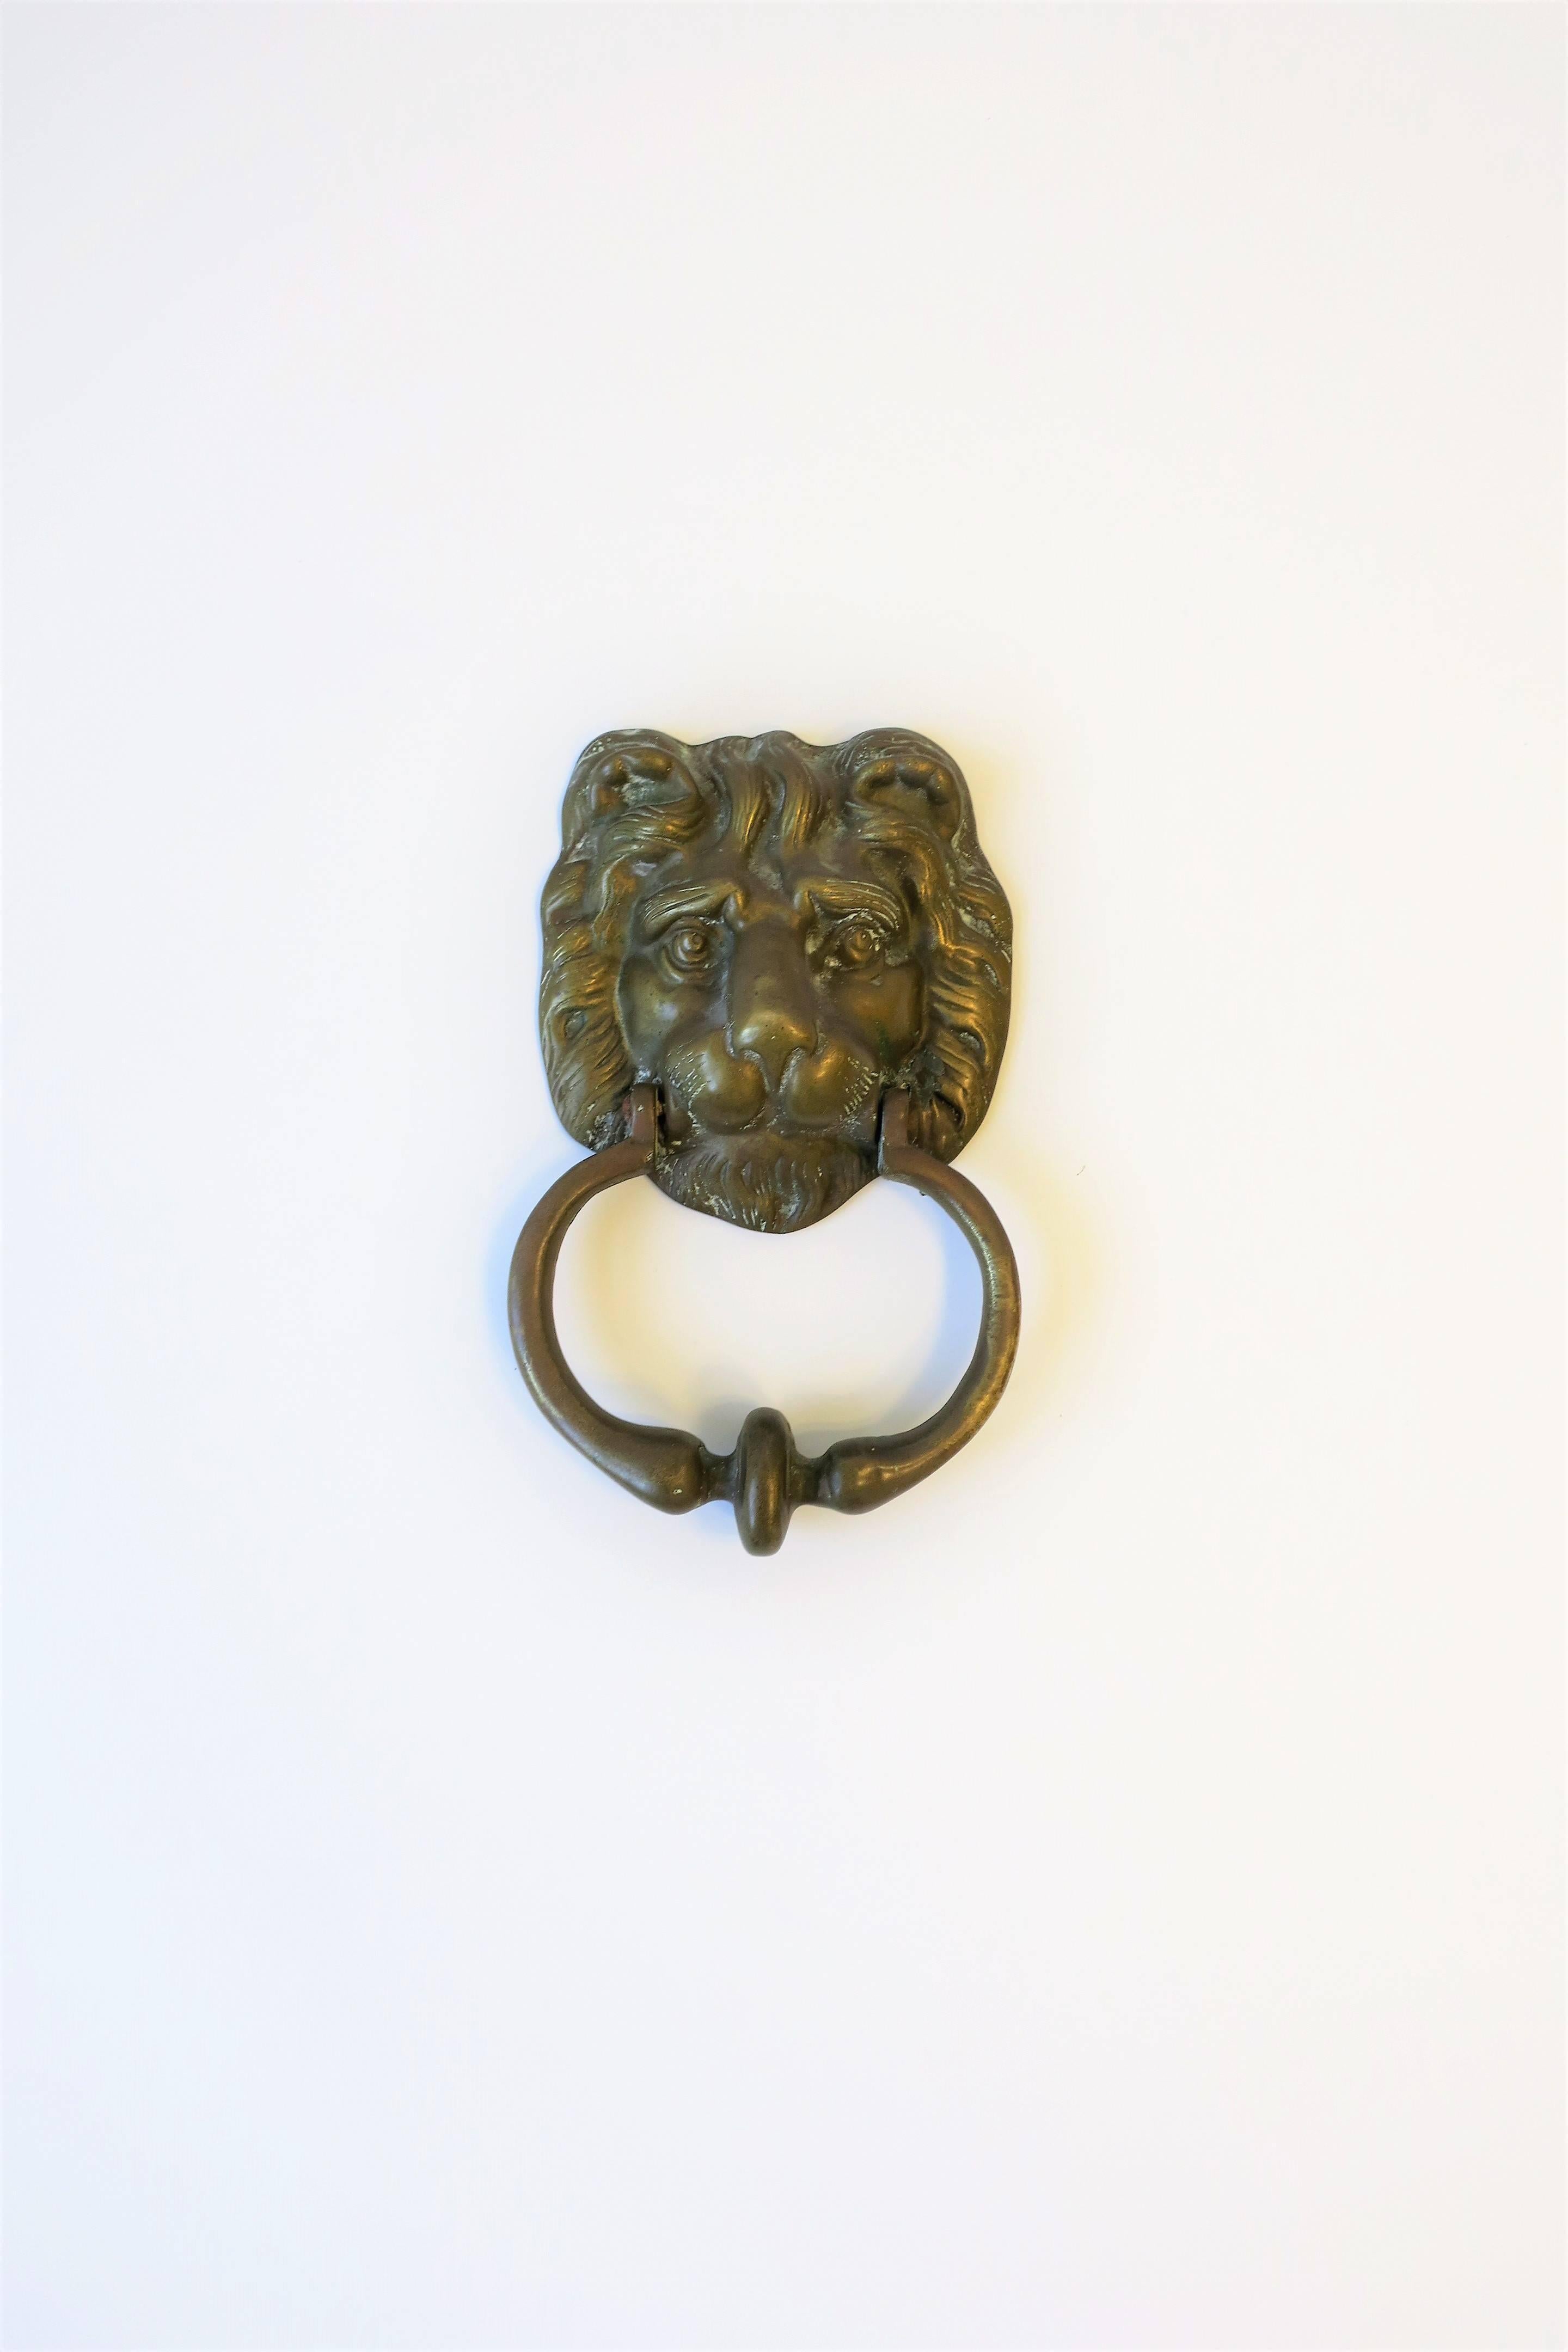 A vintage solid brass lion head door knocker hardware piece in the neoclassical style, circa 20th century, 1970s or later.

Piece measures: 5.50 in. W x 8 in. H.